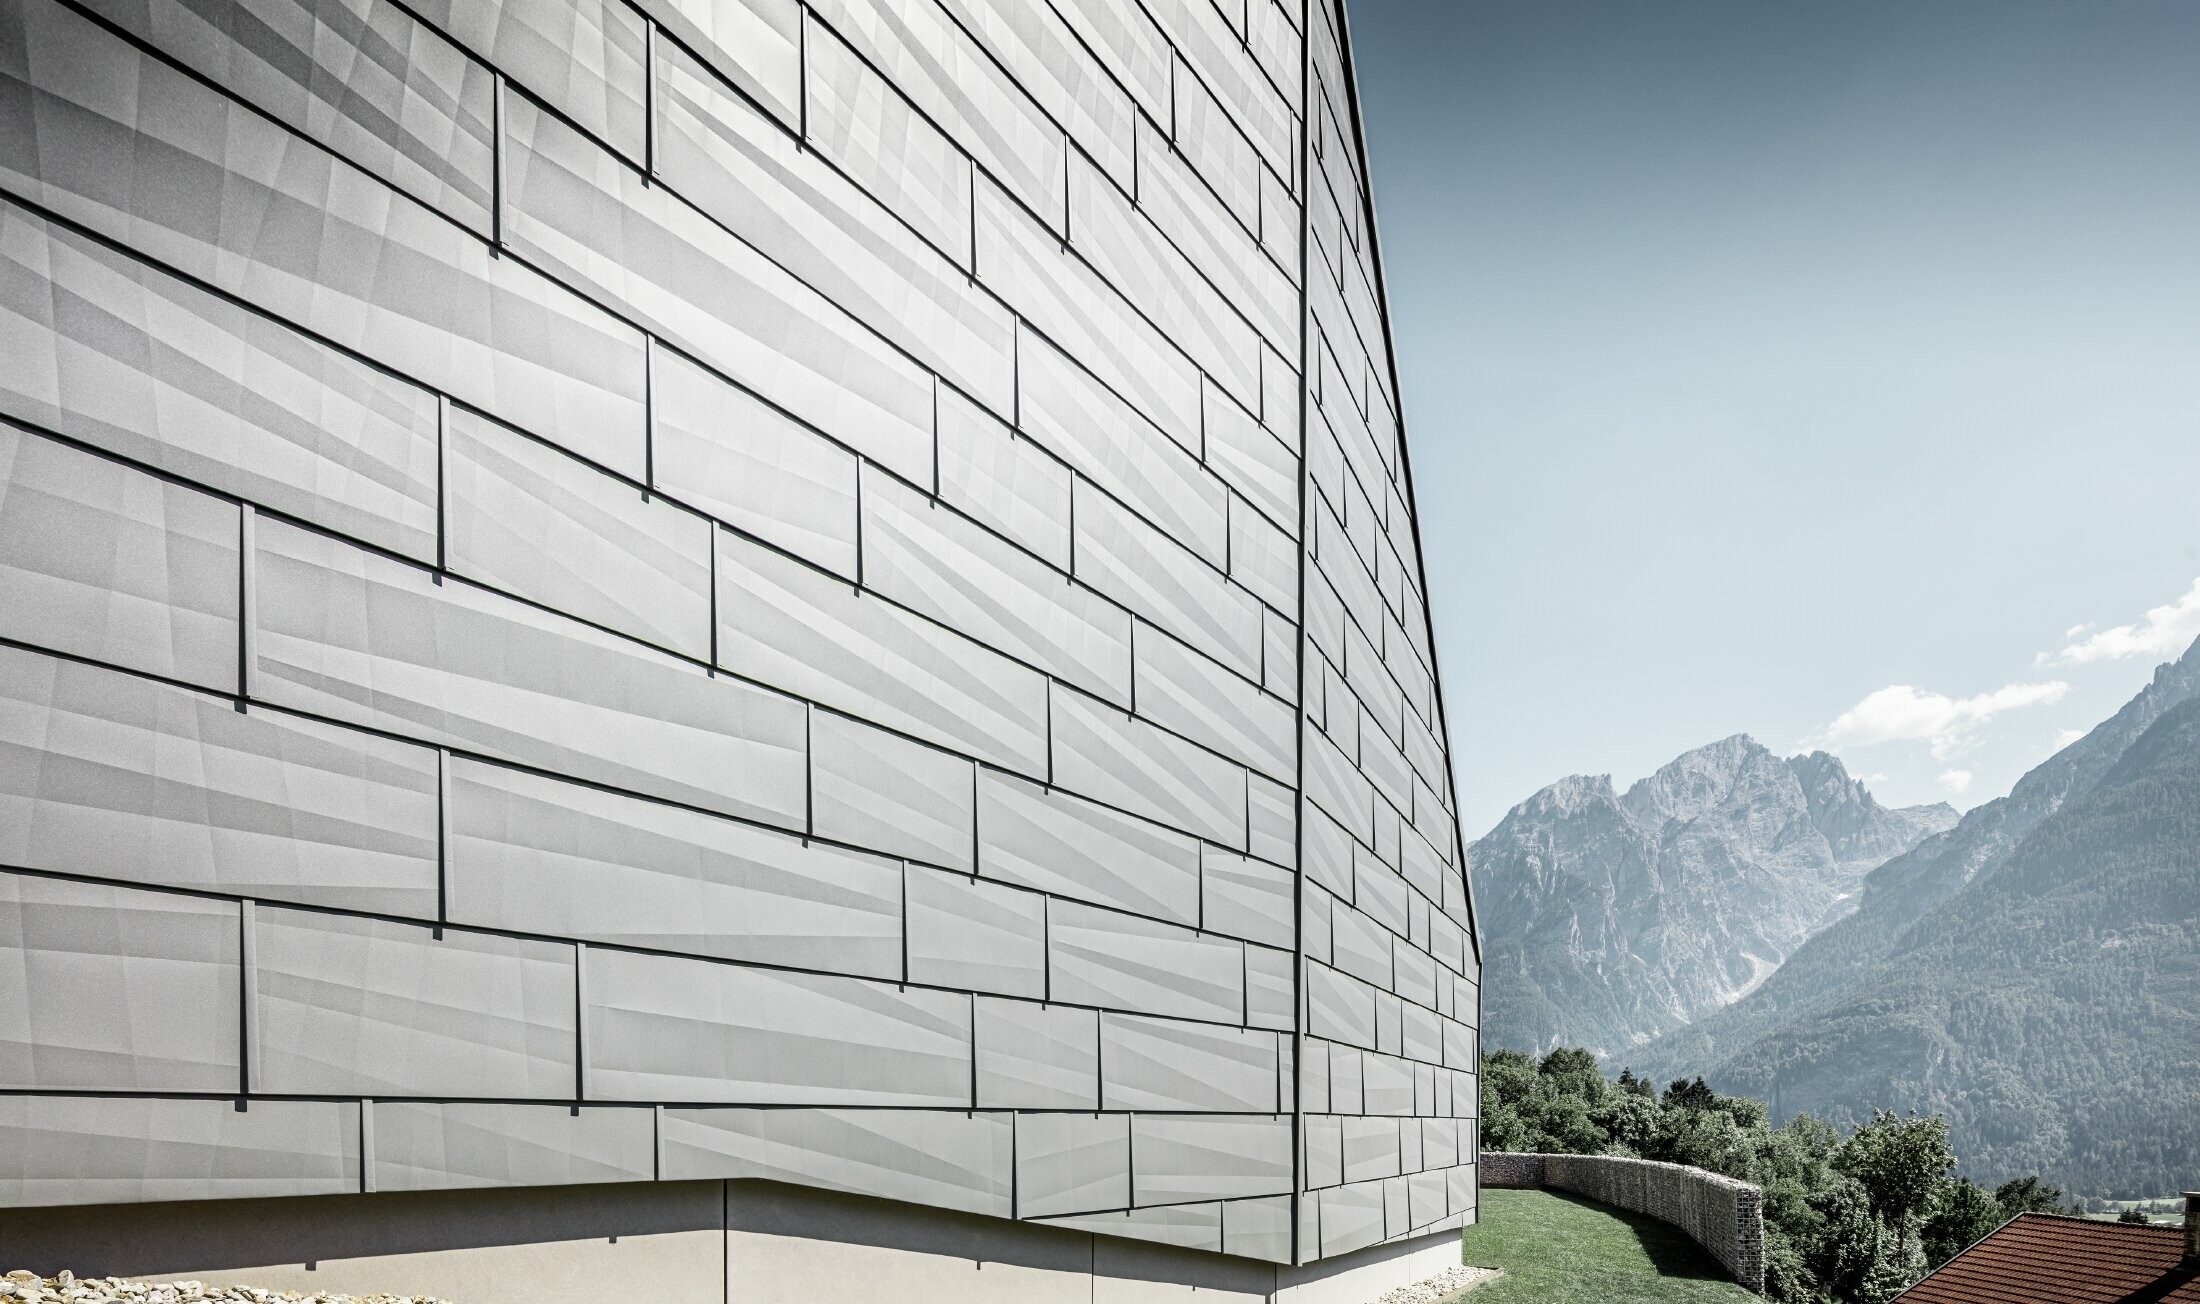 The weather face of a detached house in Lienz, Austria, was clad in the PREFA FX.12 façade panel in P.10 light grey.